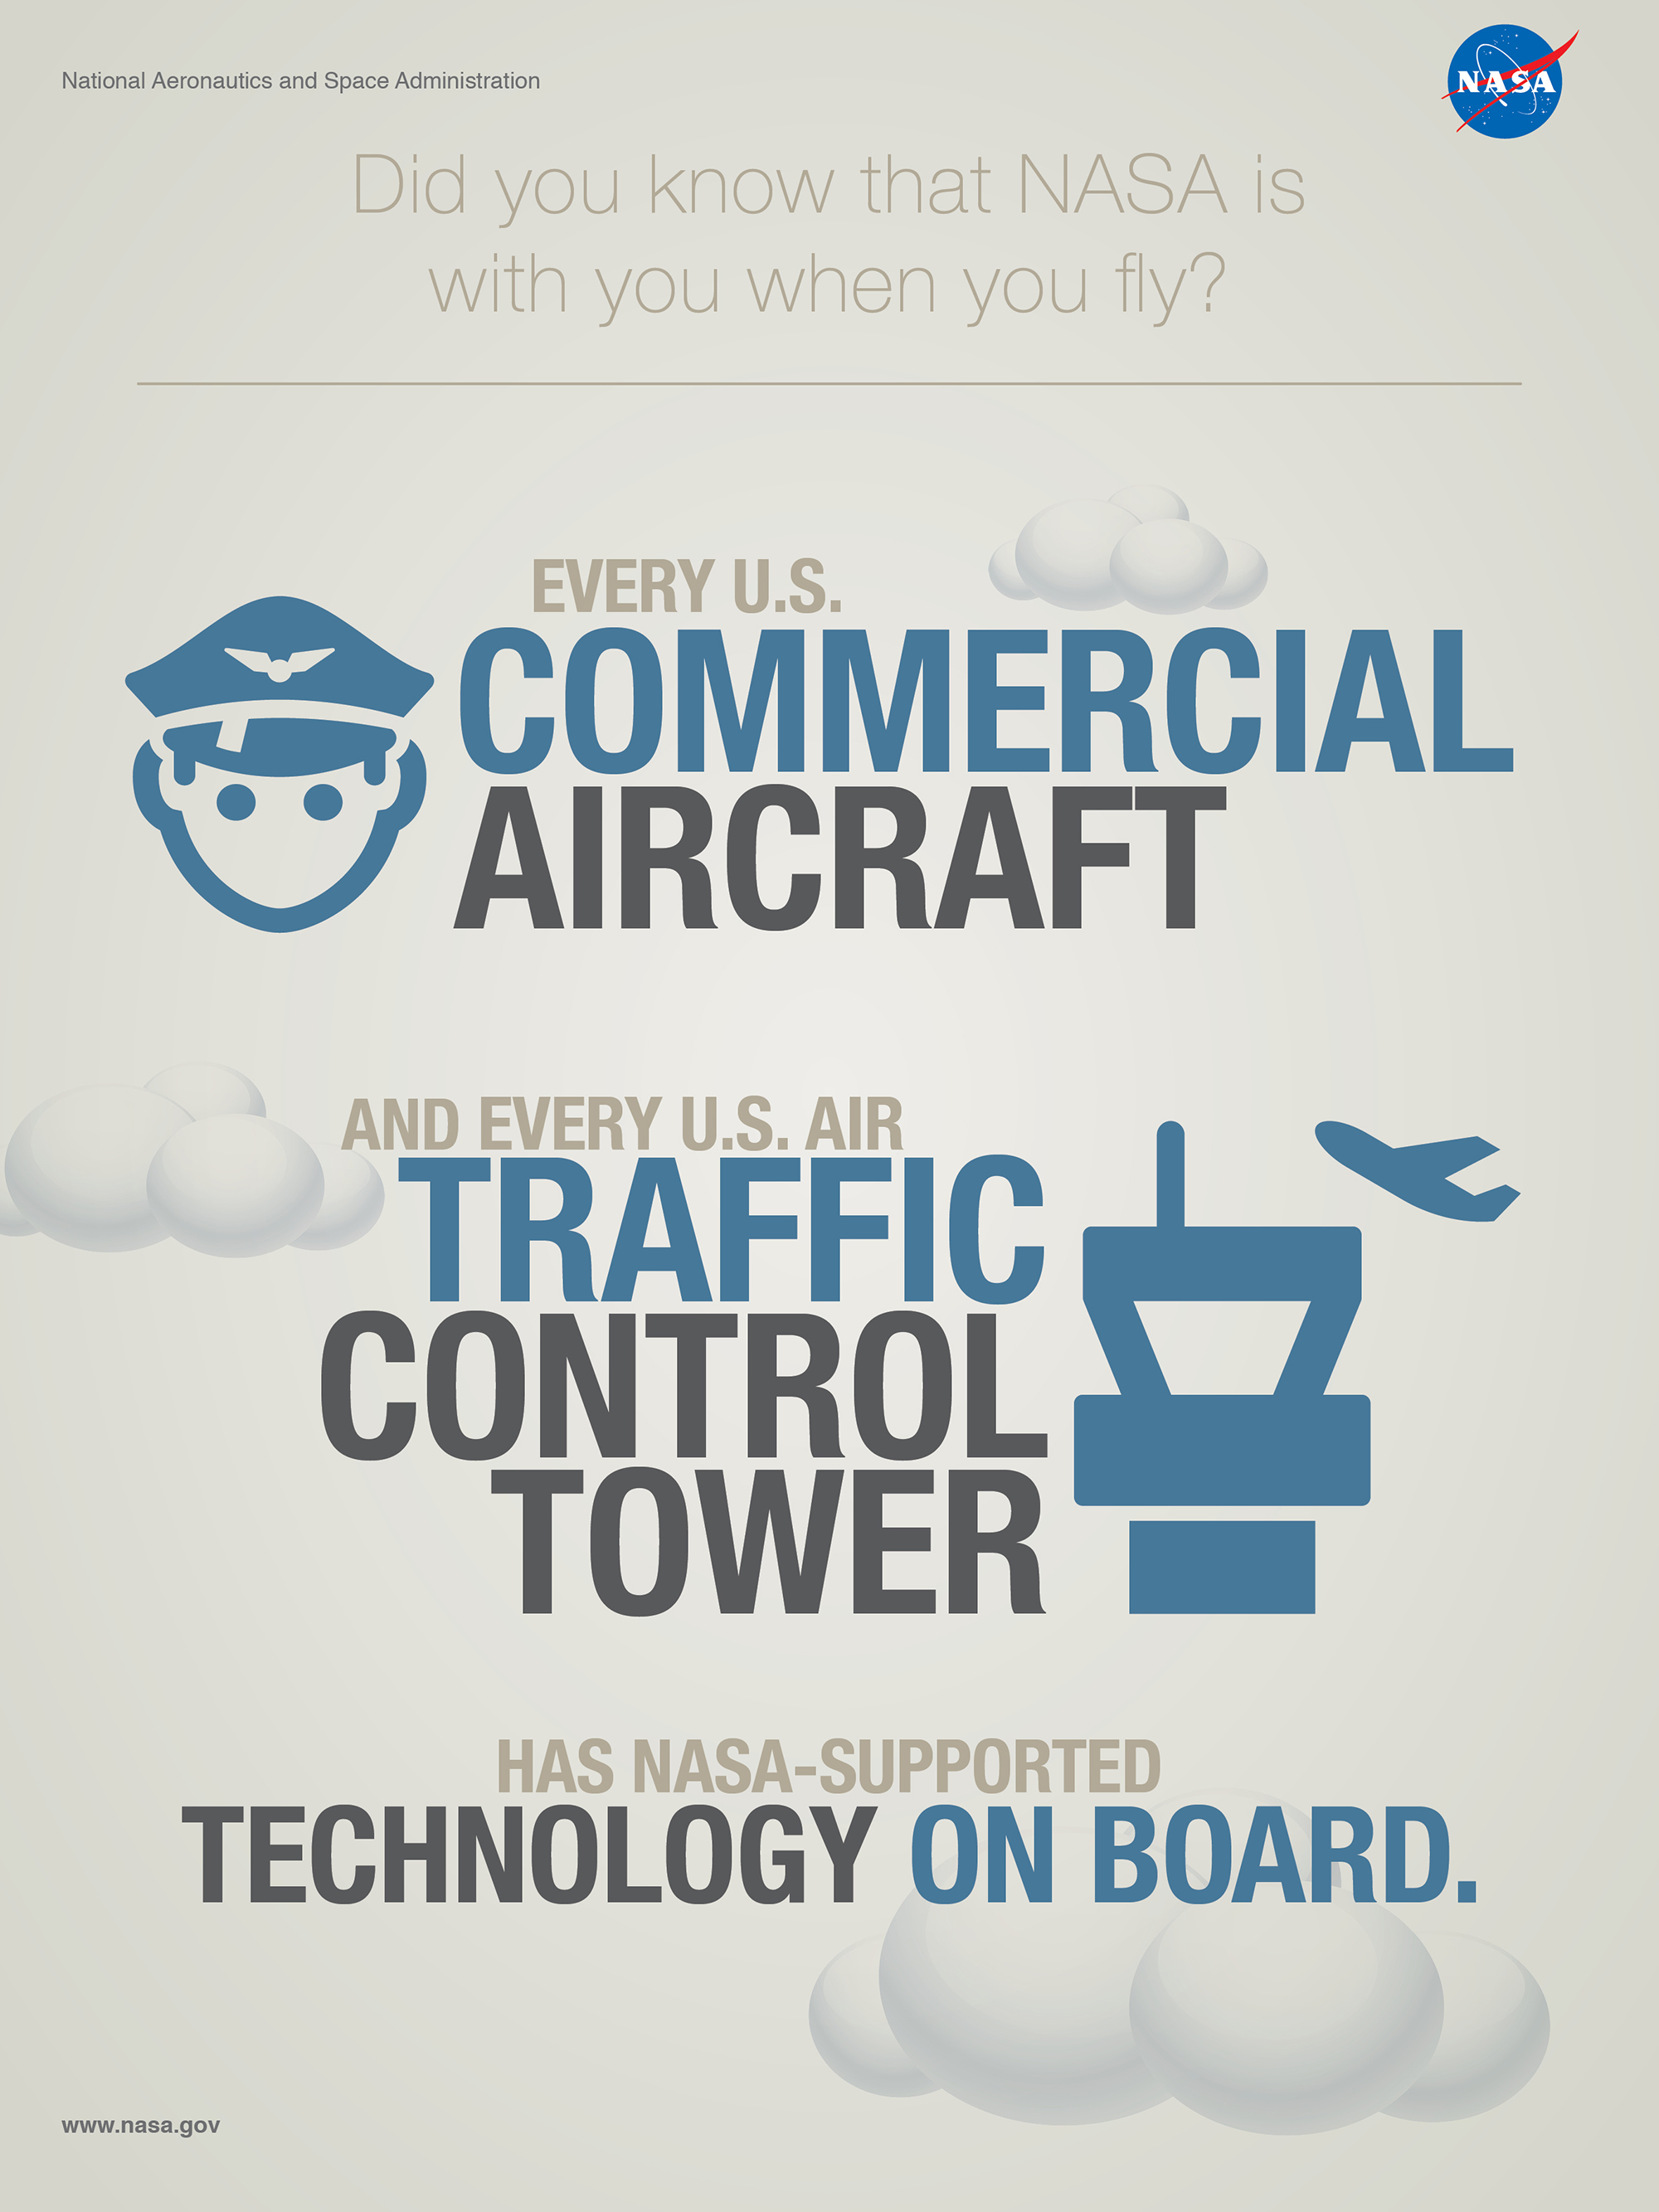 Every U.S. commercial aircraft and every US Air Traffic Control Tower has NASA Technology Onboard.